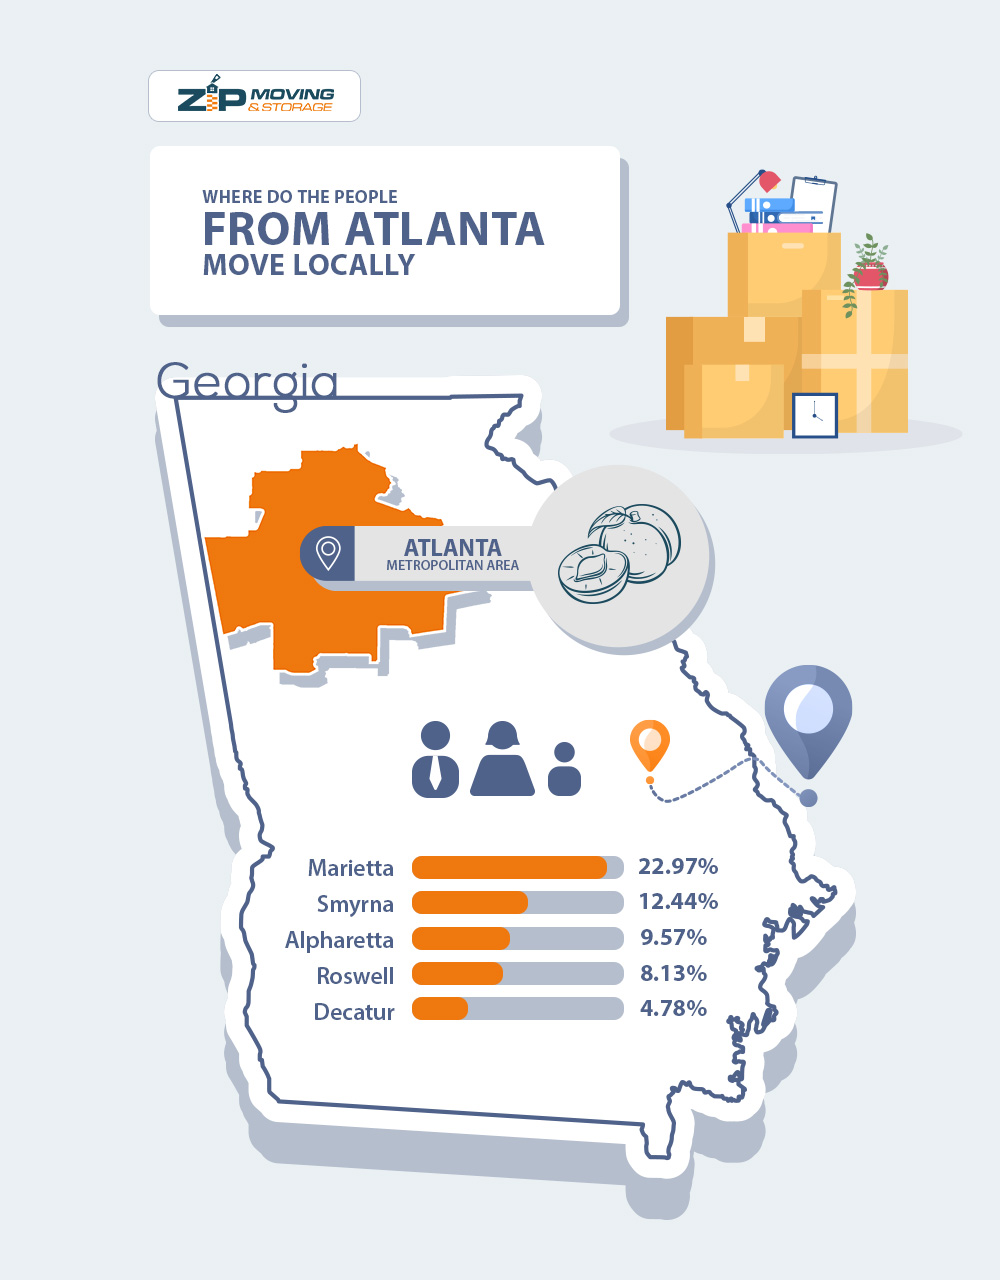 Top 5 place people from Atlanta move locally